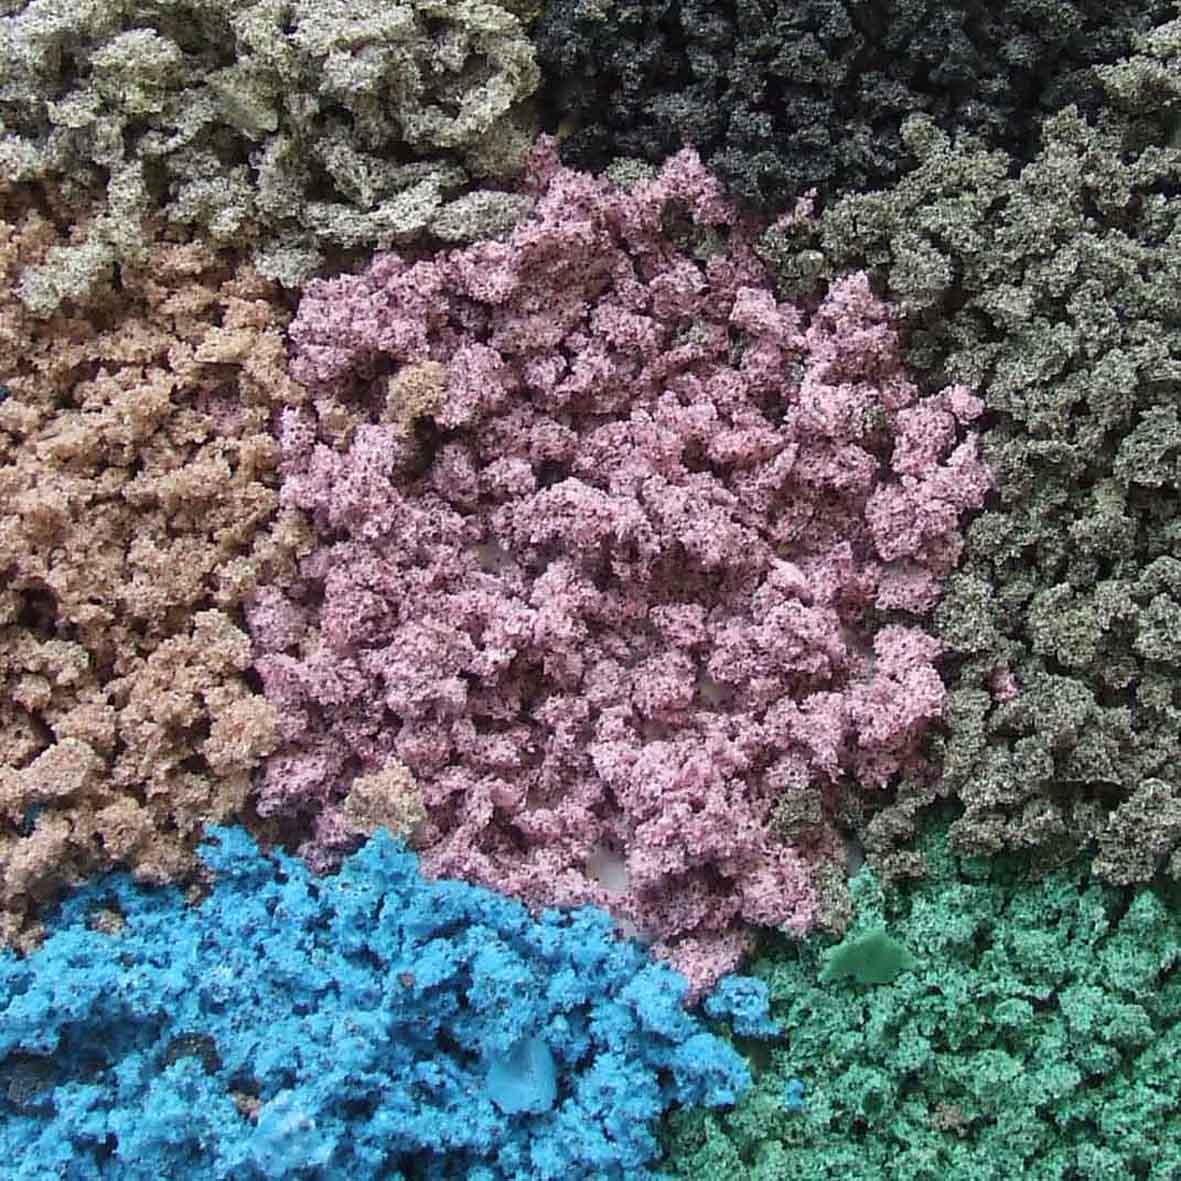 Seven piles of tiny stones that resemble sand. Pink is in the middle and around the outside is beige, light grey, black, dark grey, green and blue. They're all uneven surfaces.